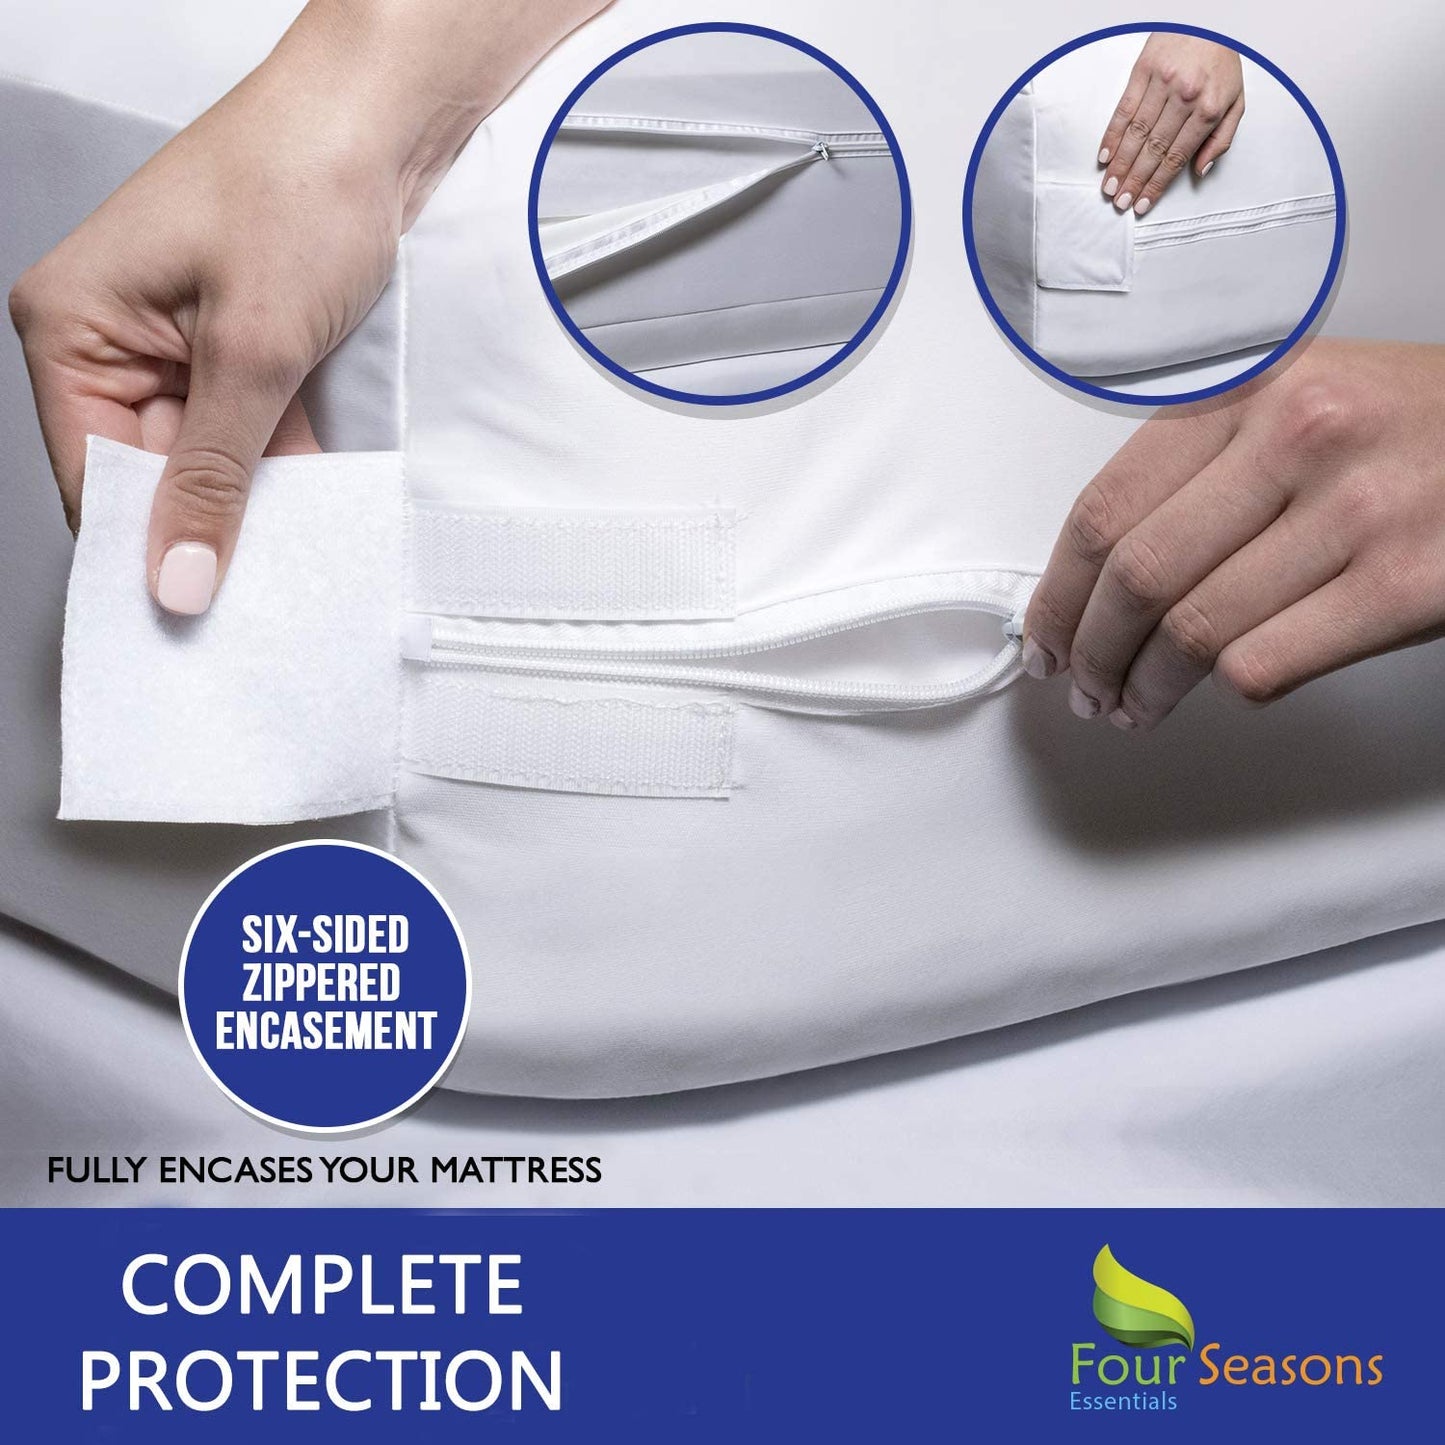 Full Size Mattress Protector Bedbug Waterproof Zippered Cover Hypoallergenic Premium Quality Encasement White